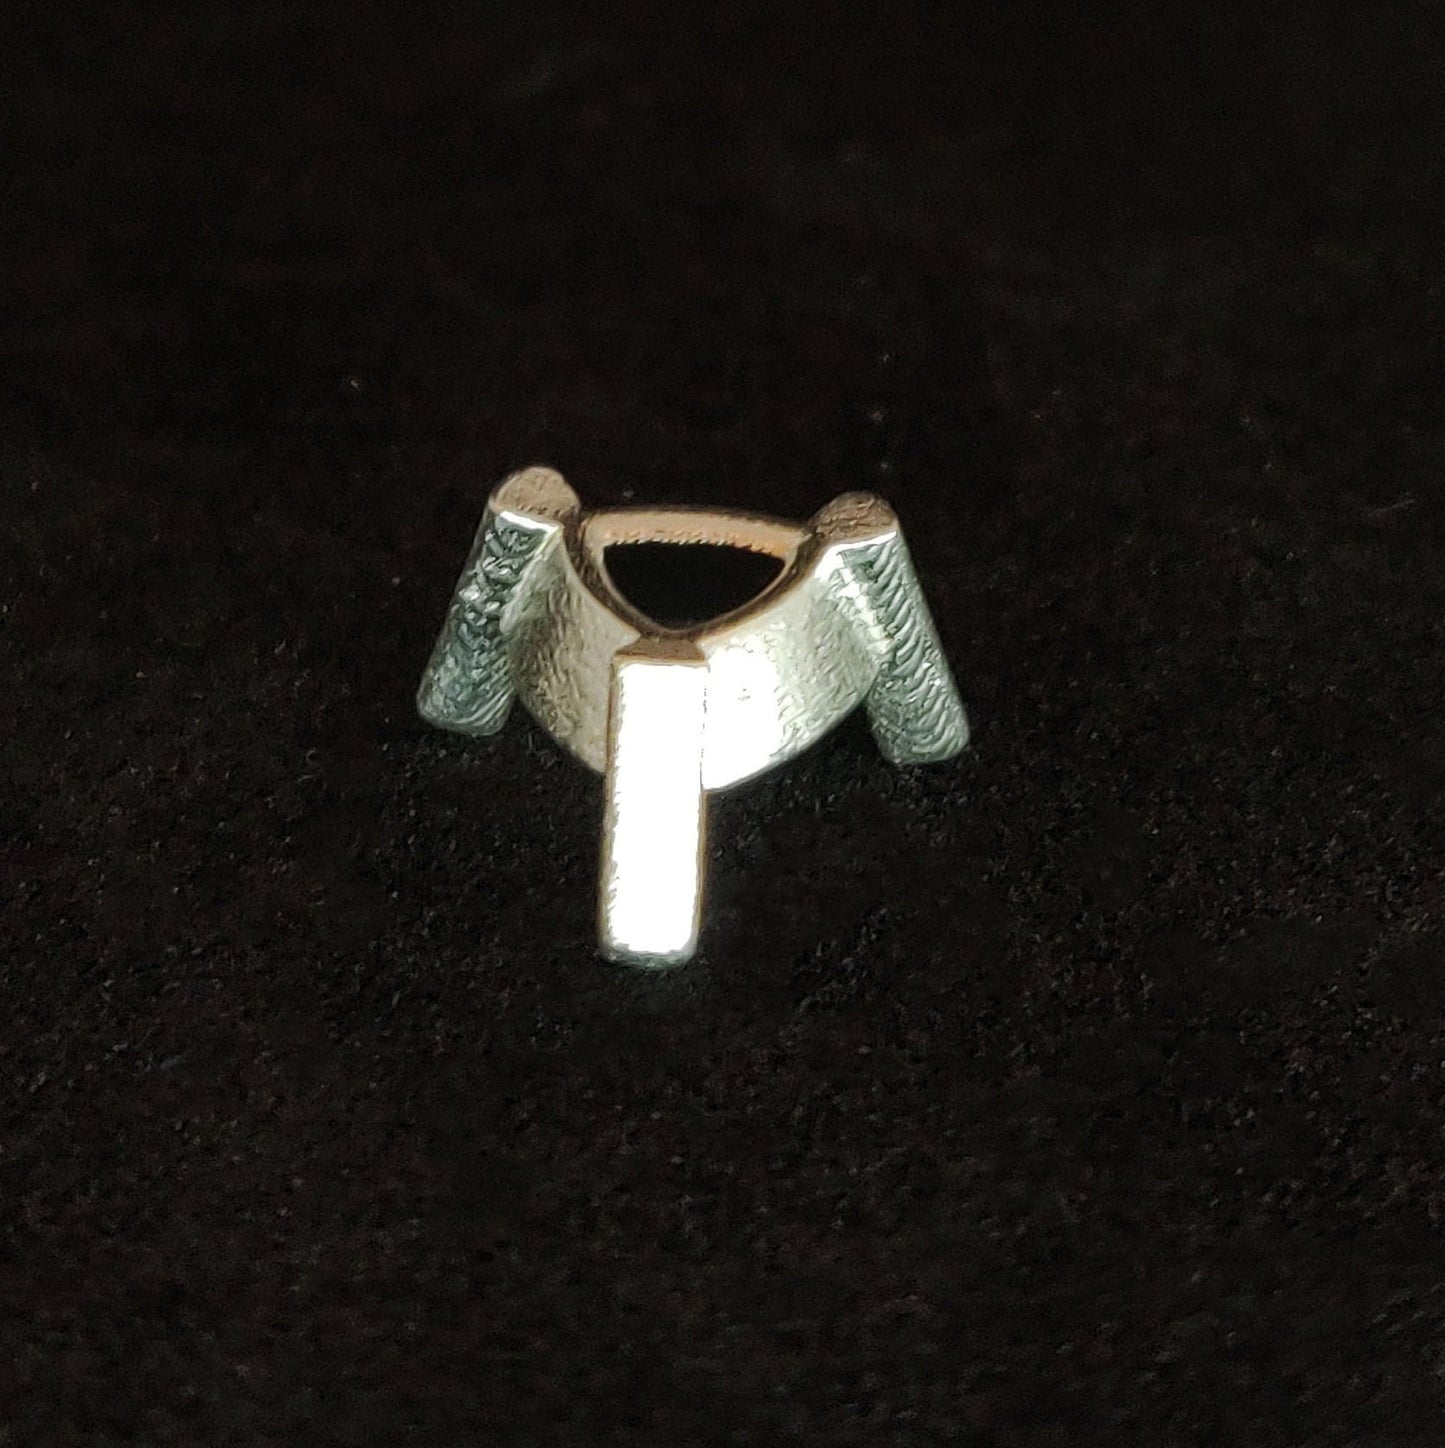 Profile view of an upside down silver trillion prong setting on a black background.